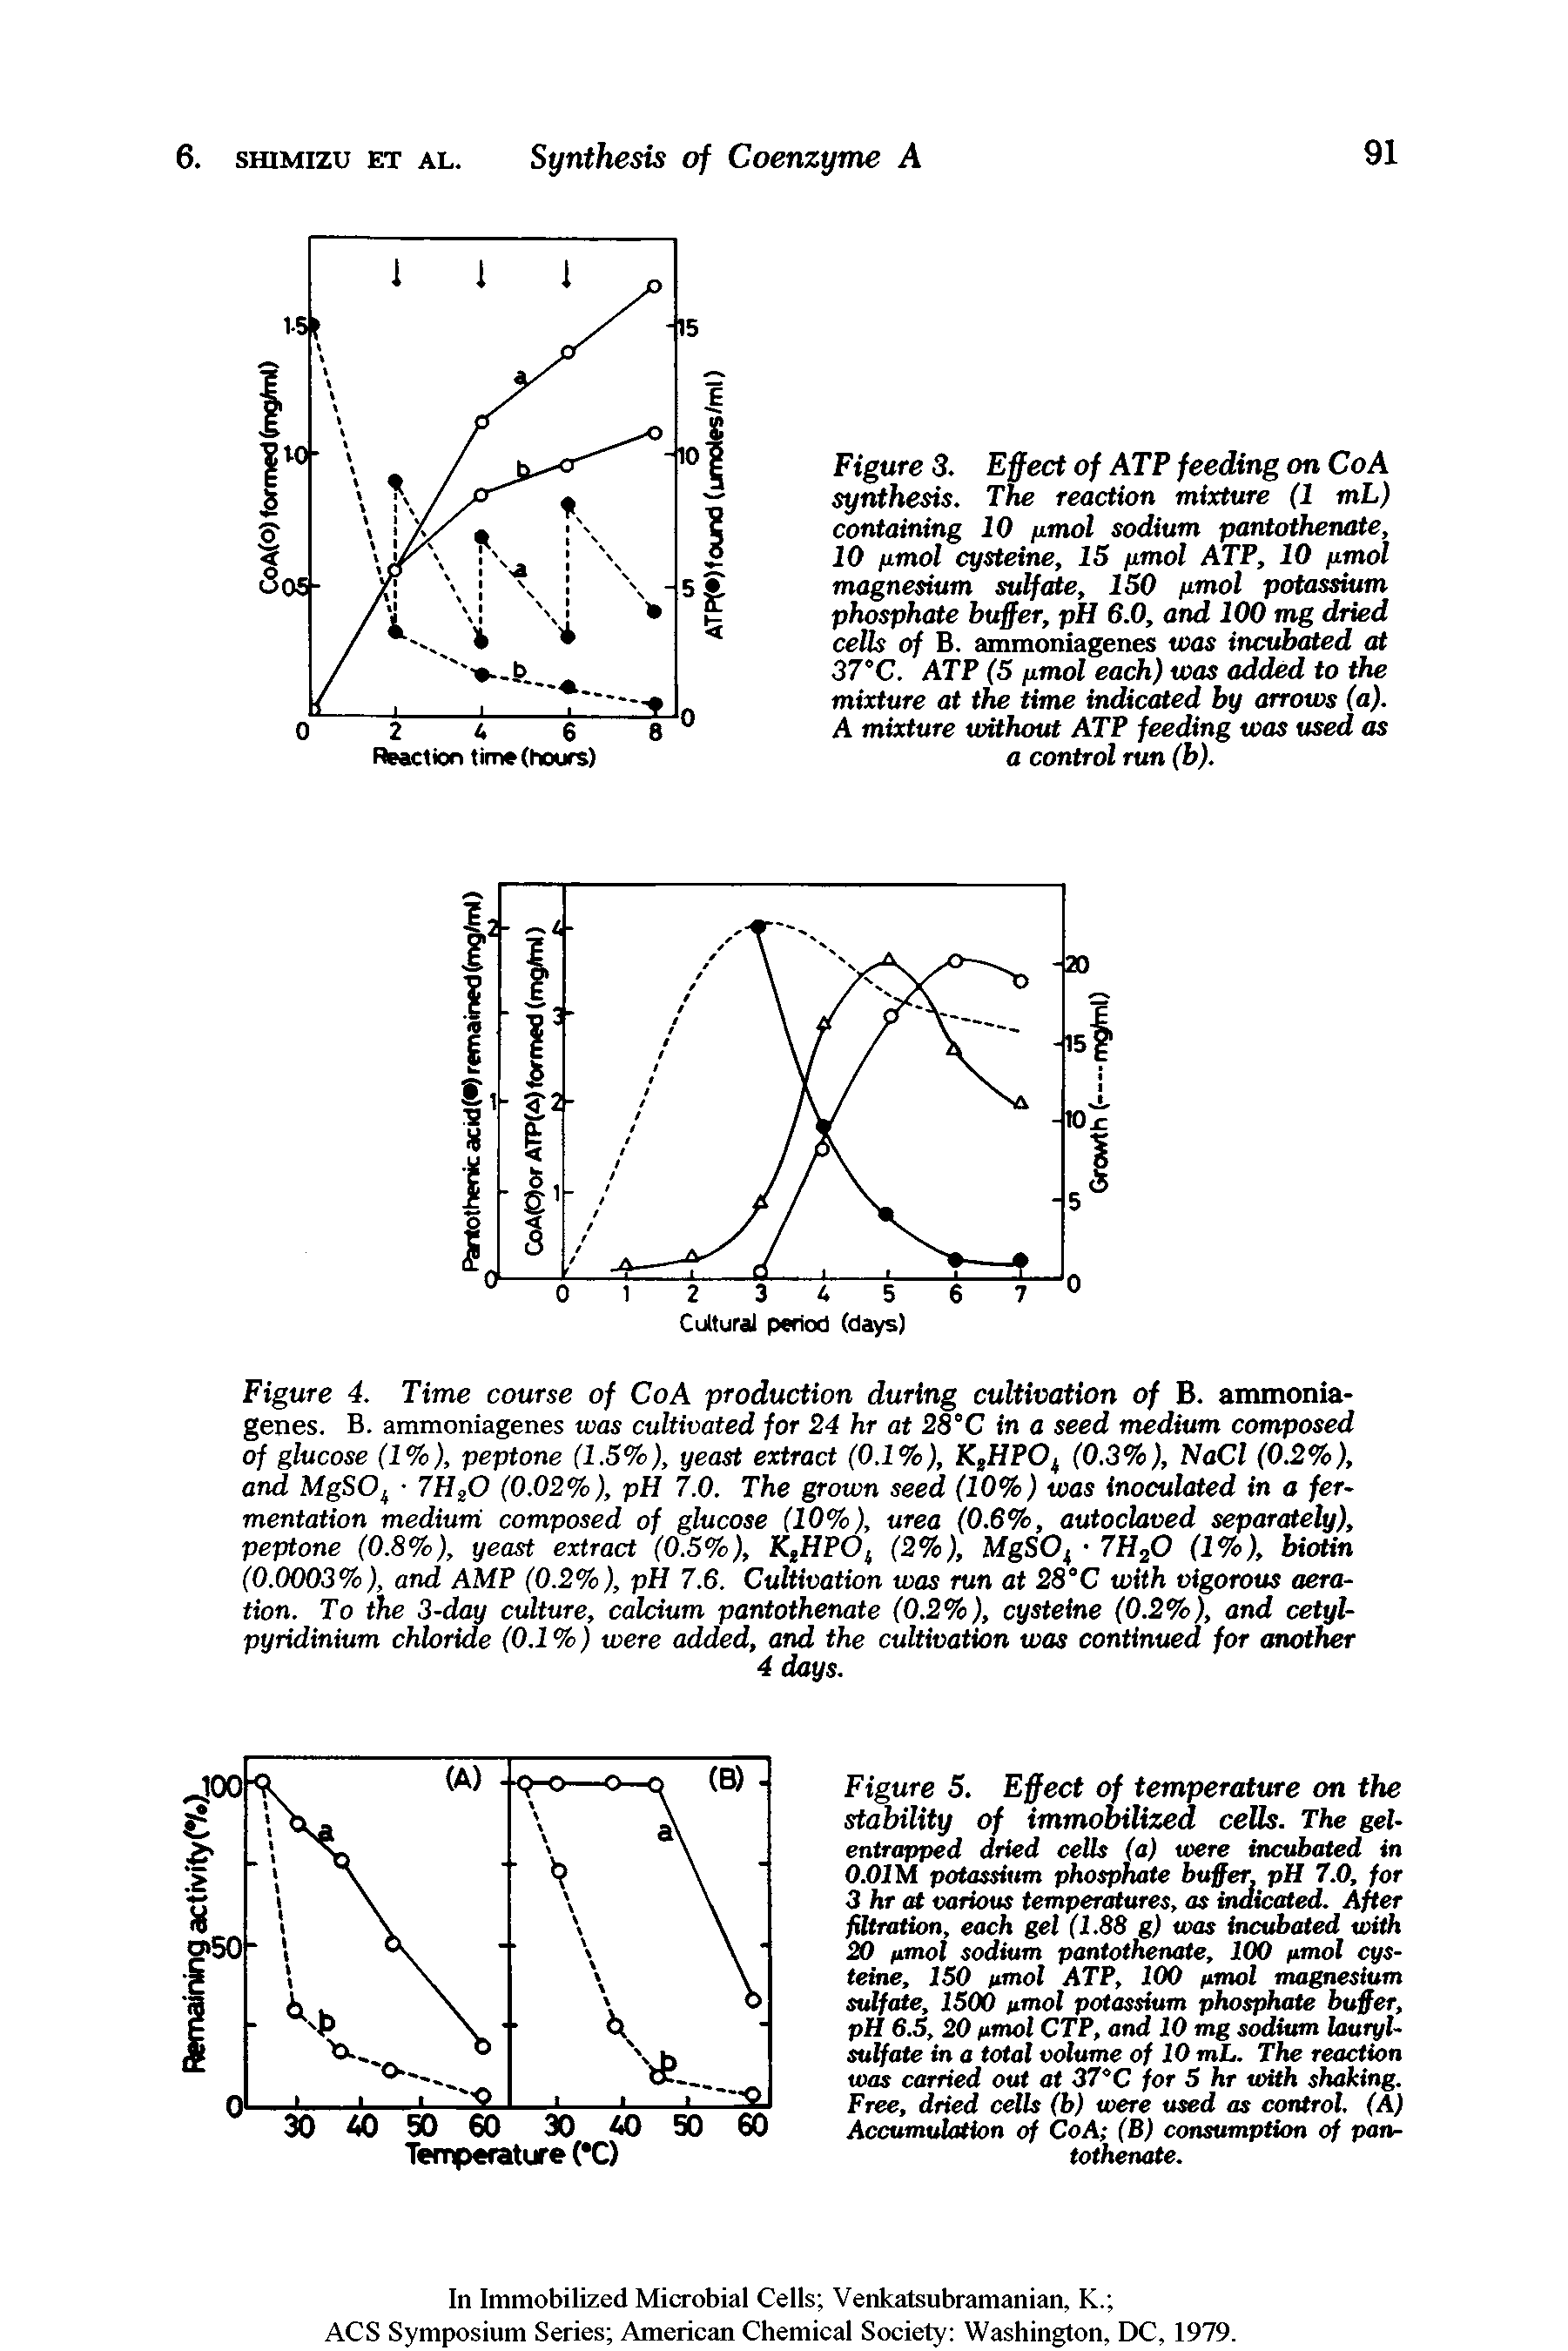 Figure 5. Effect of temperature on the stability of immobilized cells. The gel-entrapped dried cells (a) were incubated in O.OIM potassium phosphate buffer, pH 7.0, for 3 hr <a various temperatures, as indicated. After filtration, each gel (1.88 g) was incubated with 20 [imol sodium pantothenate, 100 [imol cysteine, ISO nmol ATP, 100 nmol magnesium sulfate, 1500 nmol potassium phosphate buffer, pH 6.5, 20 nmol CTP, and 10 mg sodium lauryl-sulfate in a total volume of 10 mL. The reaction was carried out at 37 C for 5 hr with shaking. Free, dried cells (b) were used as cotUrol. (A) Accumulation of Co A (B) consumption of pantothenate.